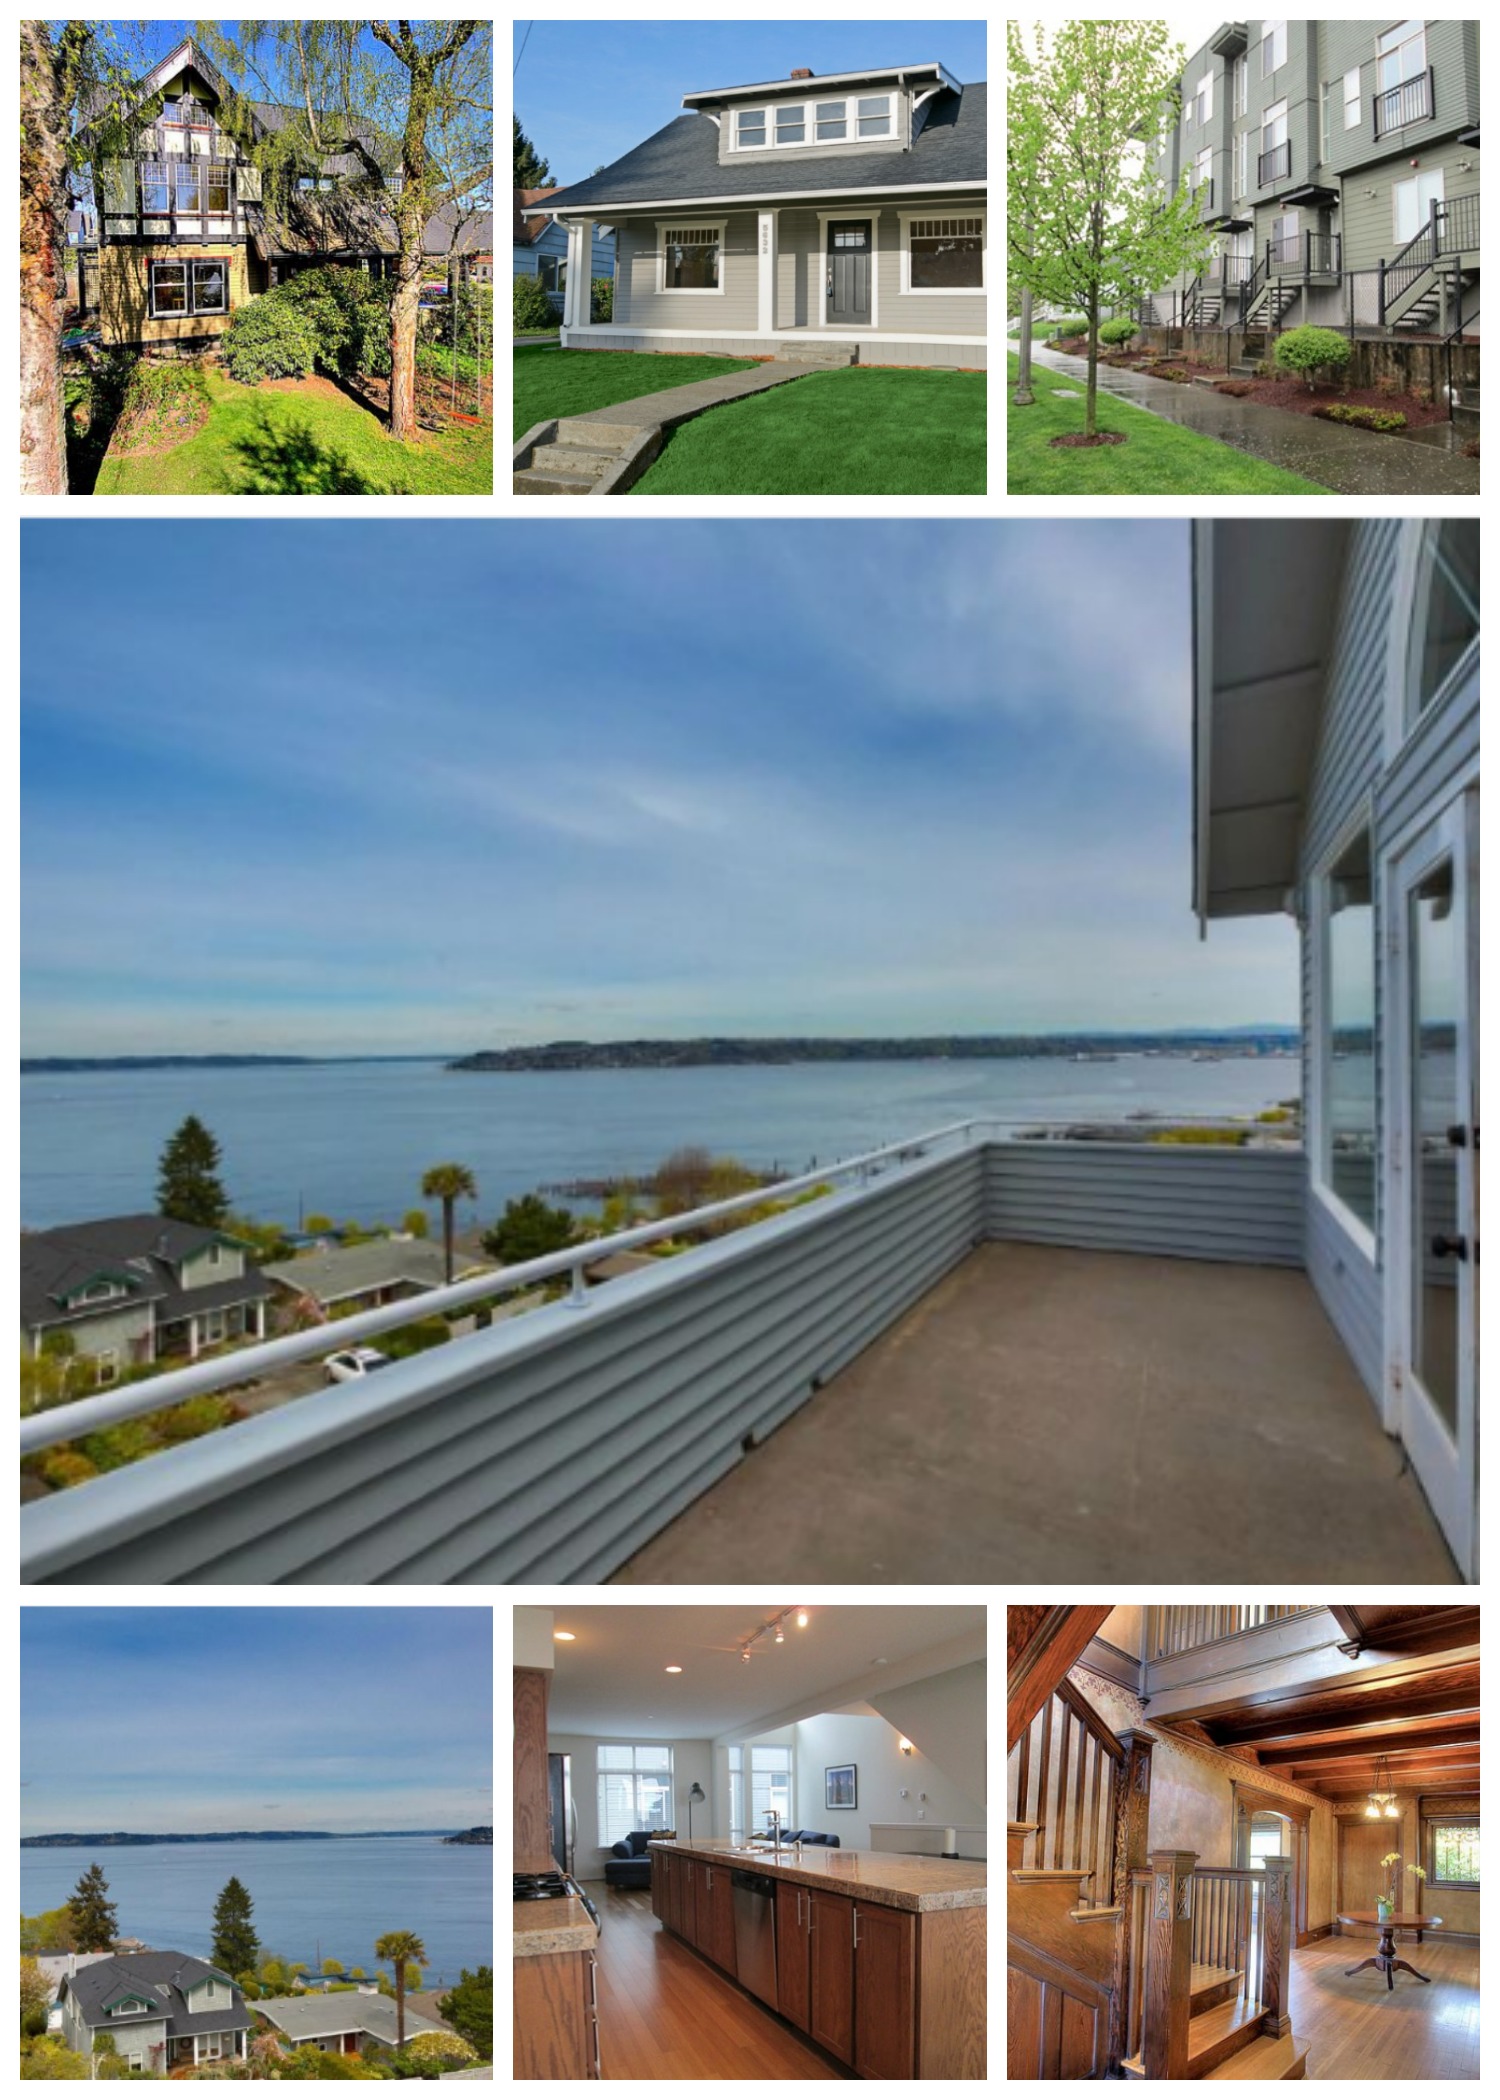 My Favorite Houses on the Market in Tacoma Right Now!